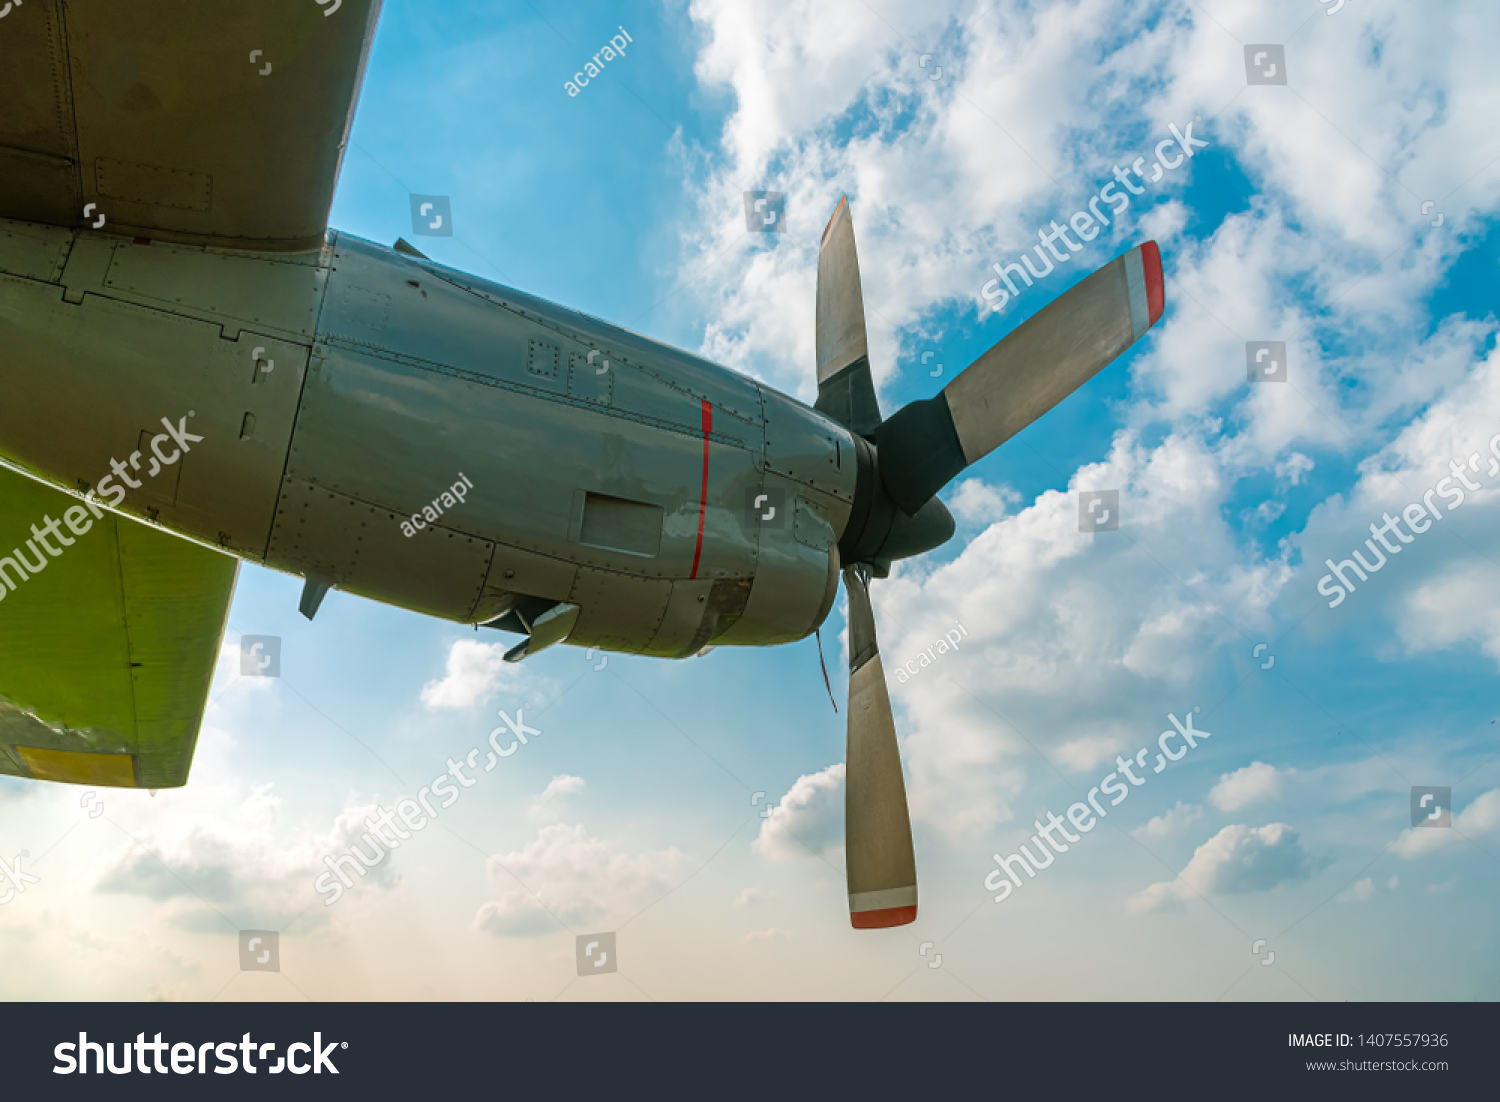 Aircraft Propeller and Spinner Engine on Airplane Wing Against Cloudy Blue Sky. Four Blade Aircraft Propeller. #1407557936